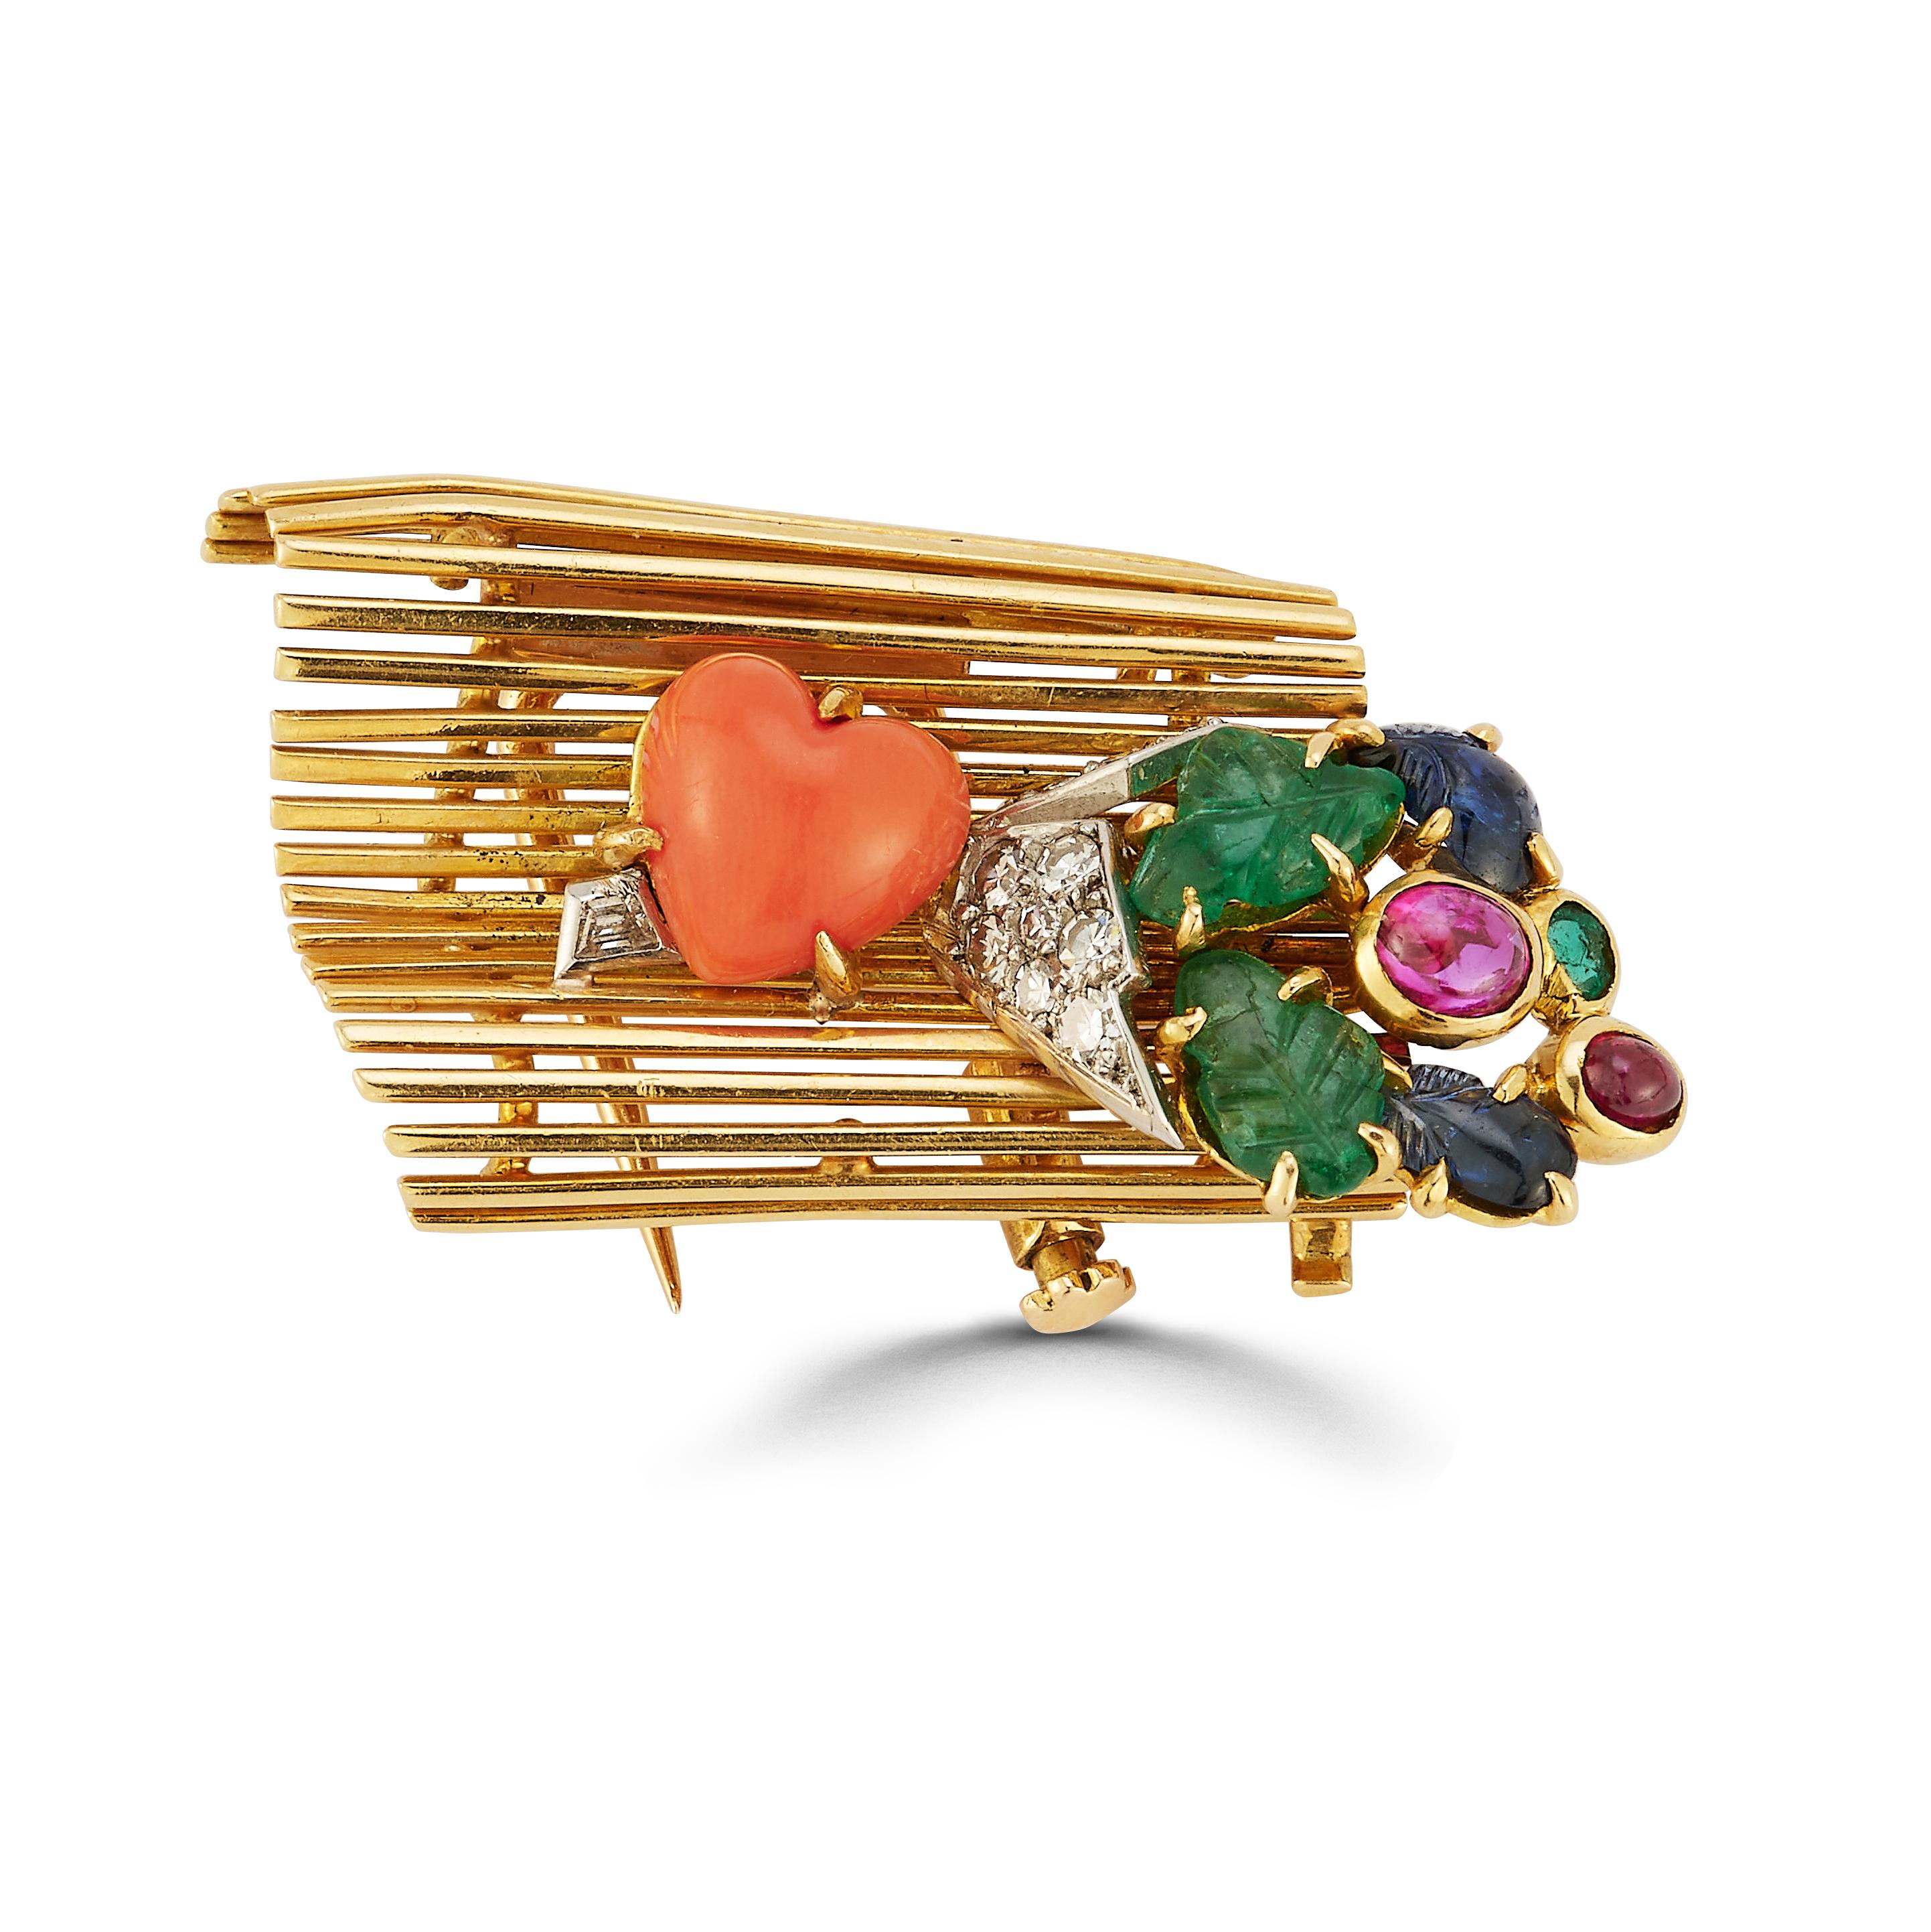 Iconic Cartier Tutti Frutti Lovers Bench Brooch

An 18 karat yellow gold brooch in the design of a garden bench adorned with a bouquet of flowers. The bouquet is set with 11 round cut diamonds, 3 carved emeralds, 2 carved sapphires, 2 cabochon